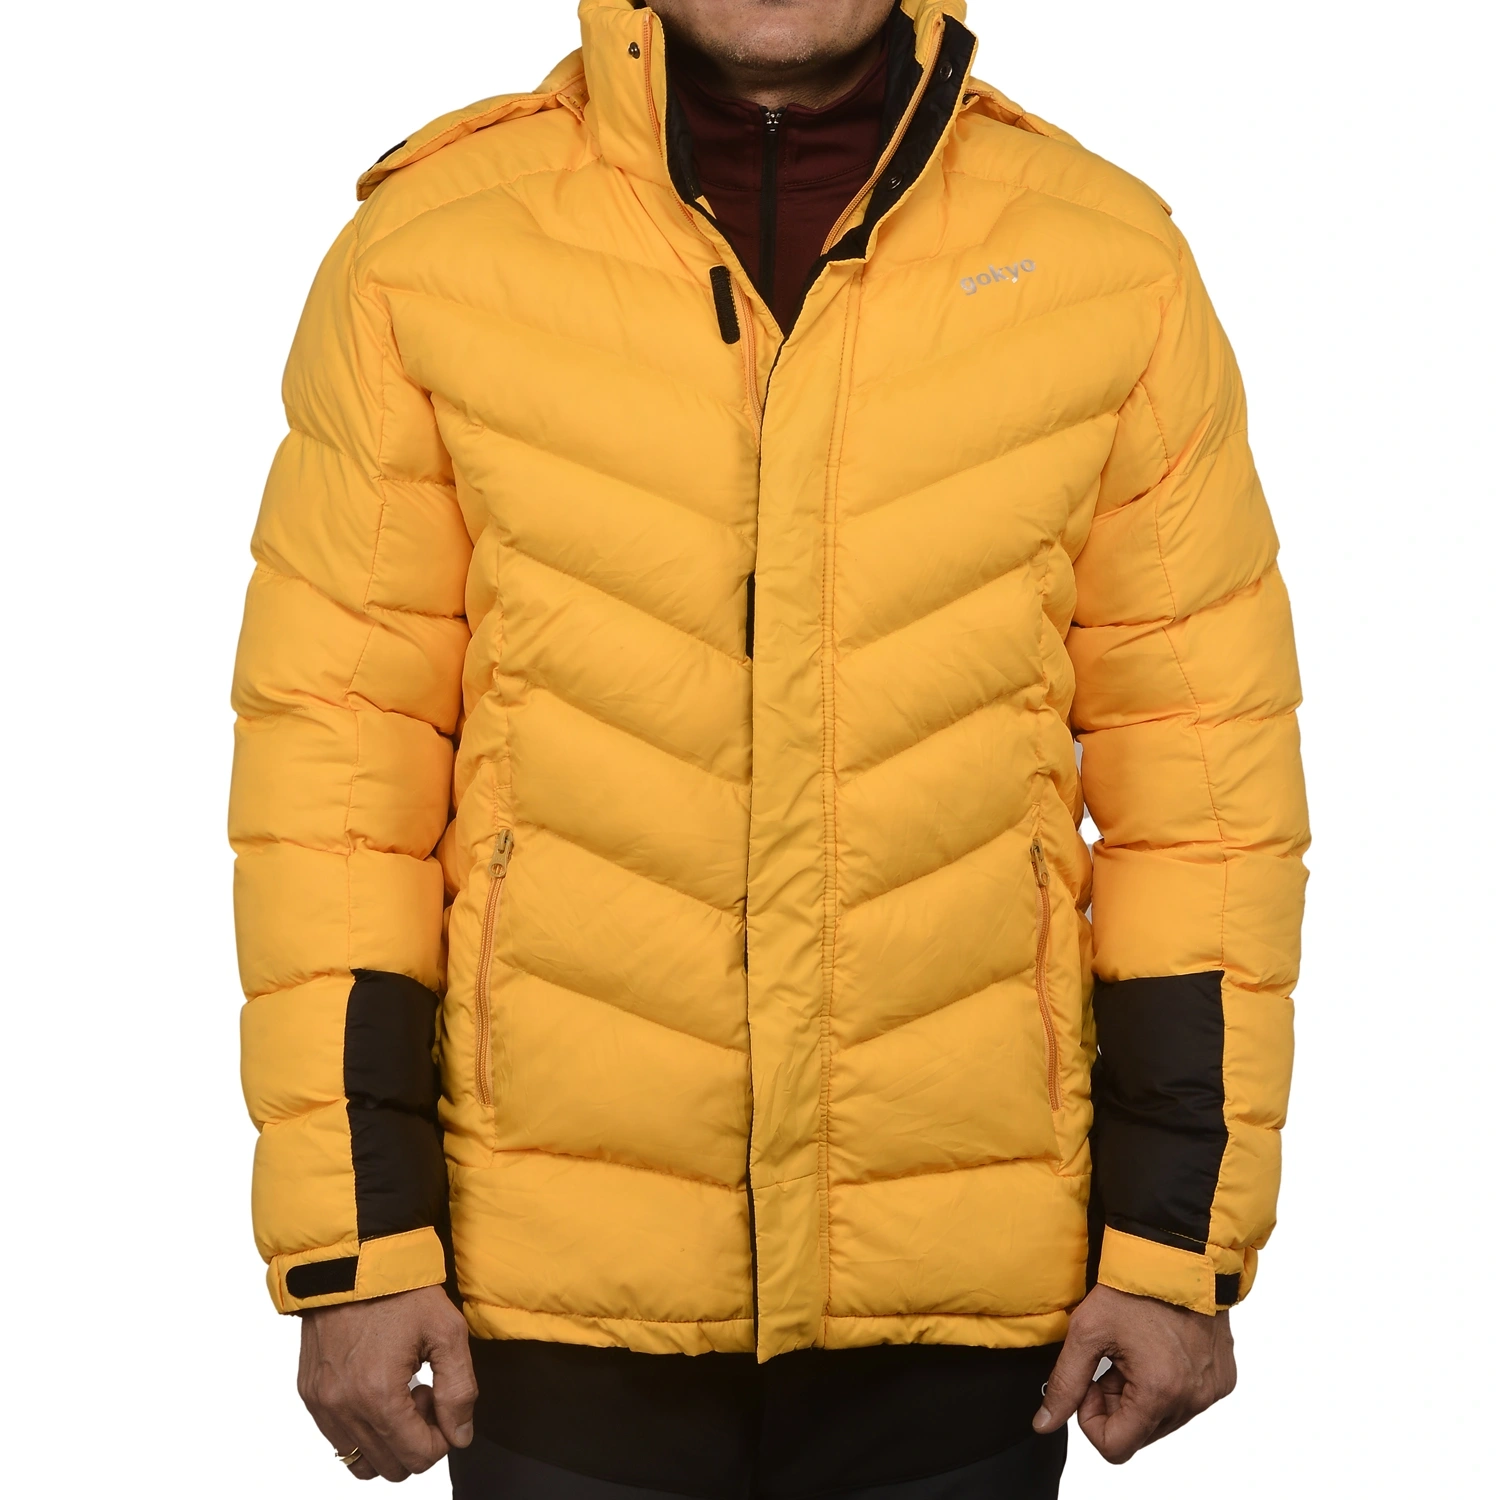 K2 Survivor Down Jacket for Men: Stylized Functionality for Extreme Cold Weather Expeditions (Up to -20°C)-230097